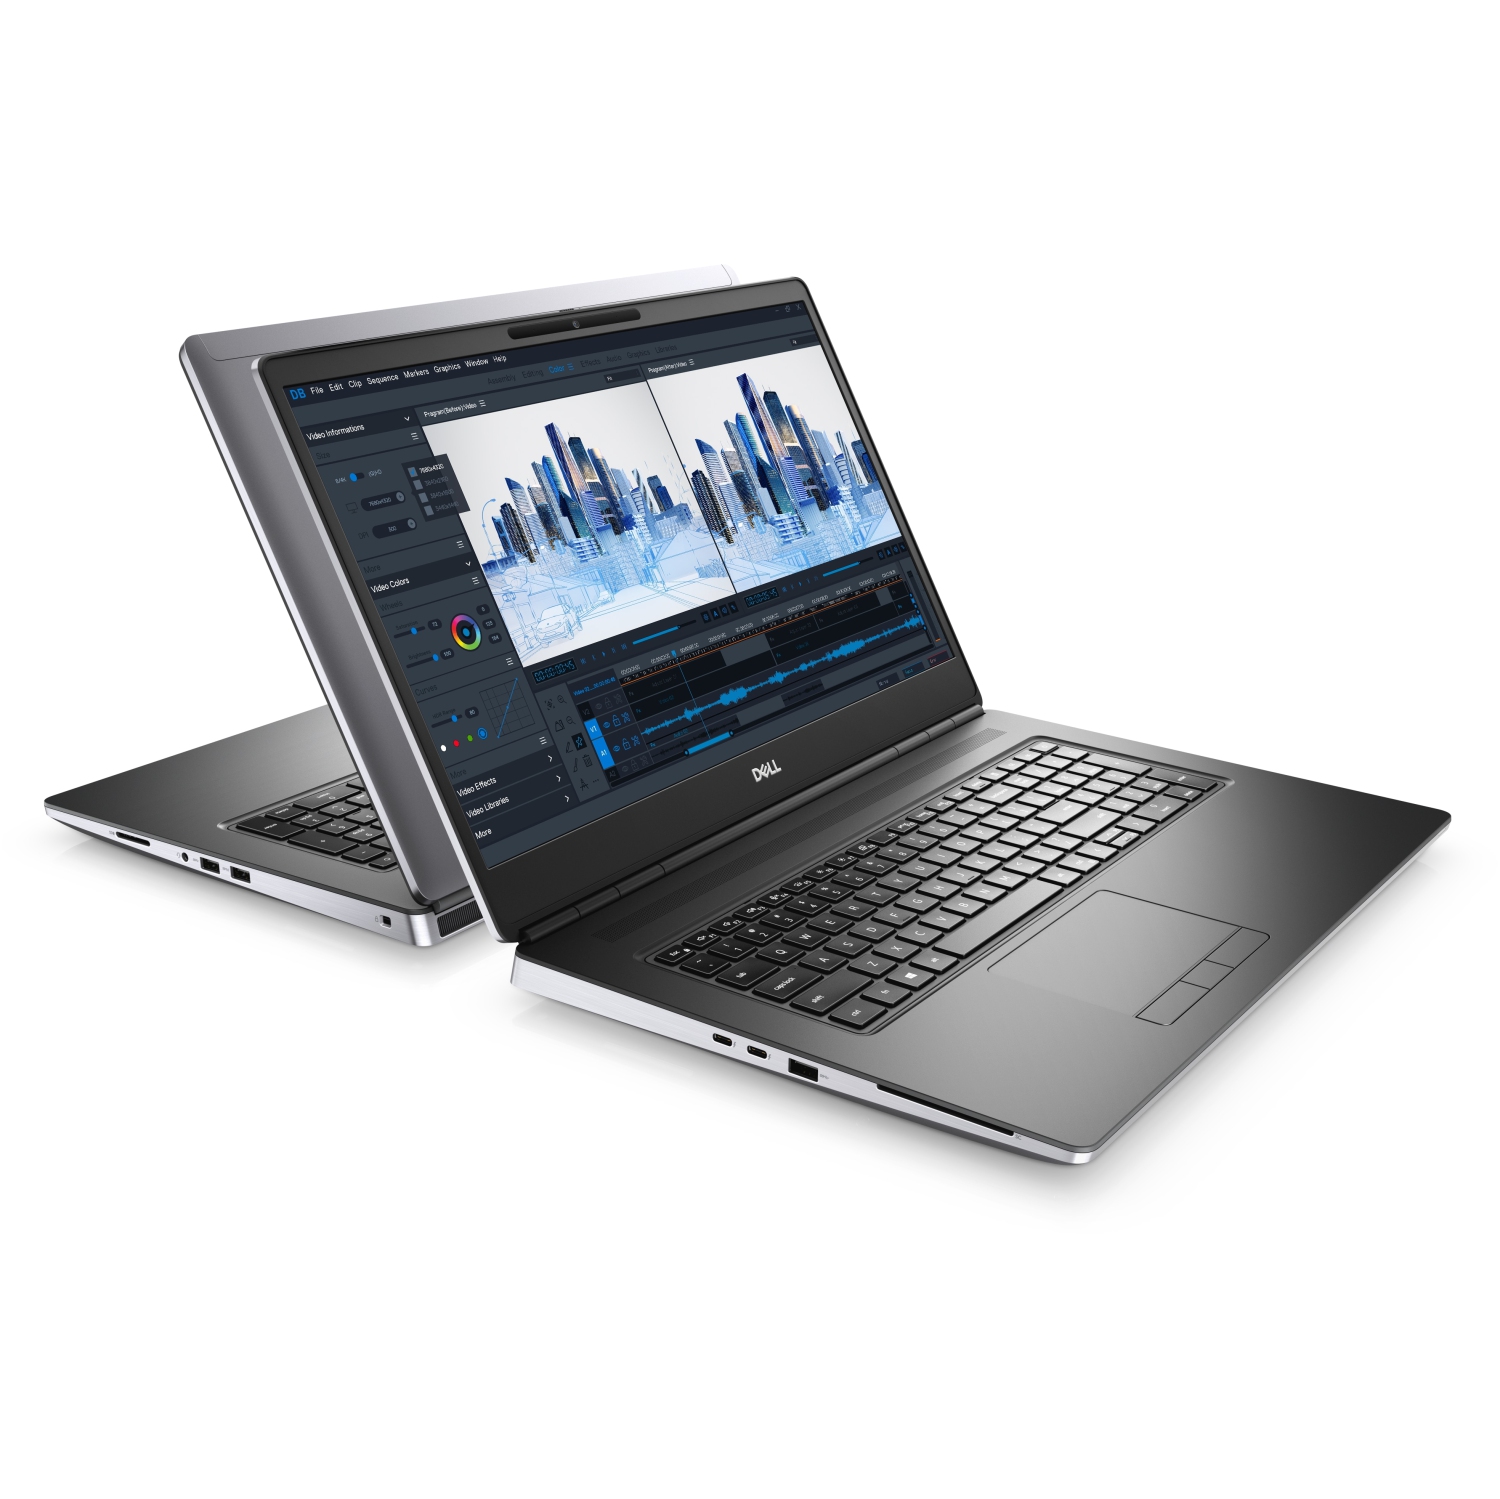 Refurbished (Excellent) - Dell Precision 7000 7760 Workstation Laptop (2021), 17.3" FHD, Core i9, 2TB SSD, 32GB RAM, RTX A5000, 8 Cores @ 5 GHz, 11th Gen CPU Certified